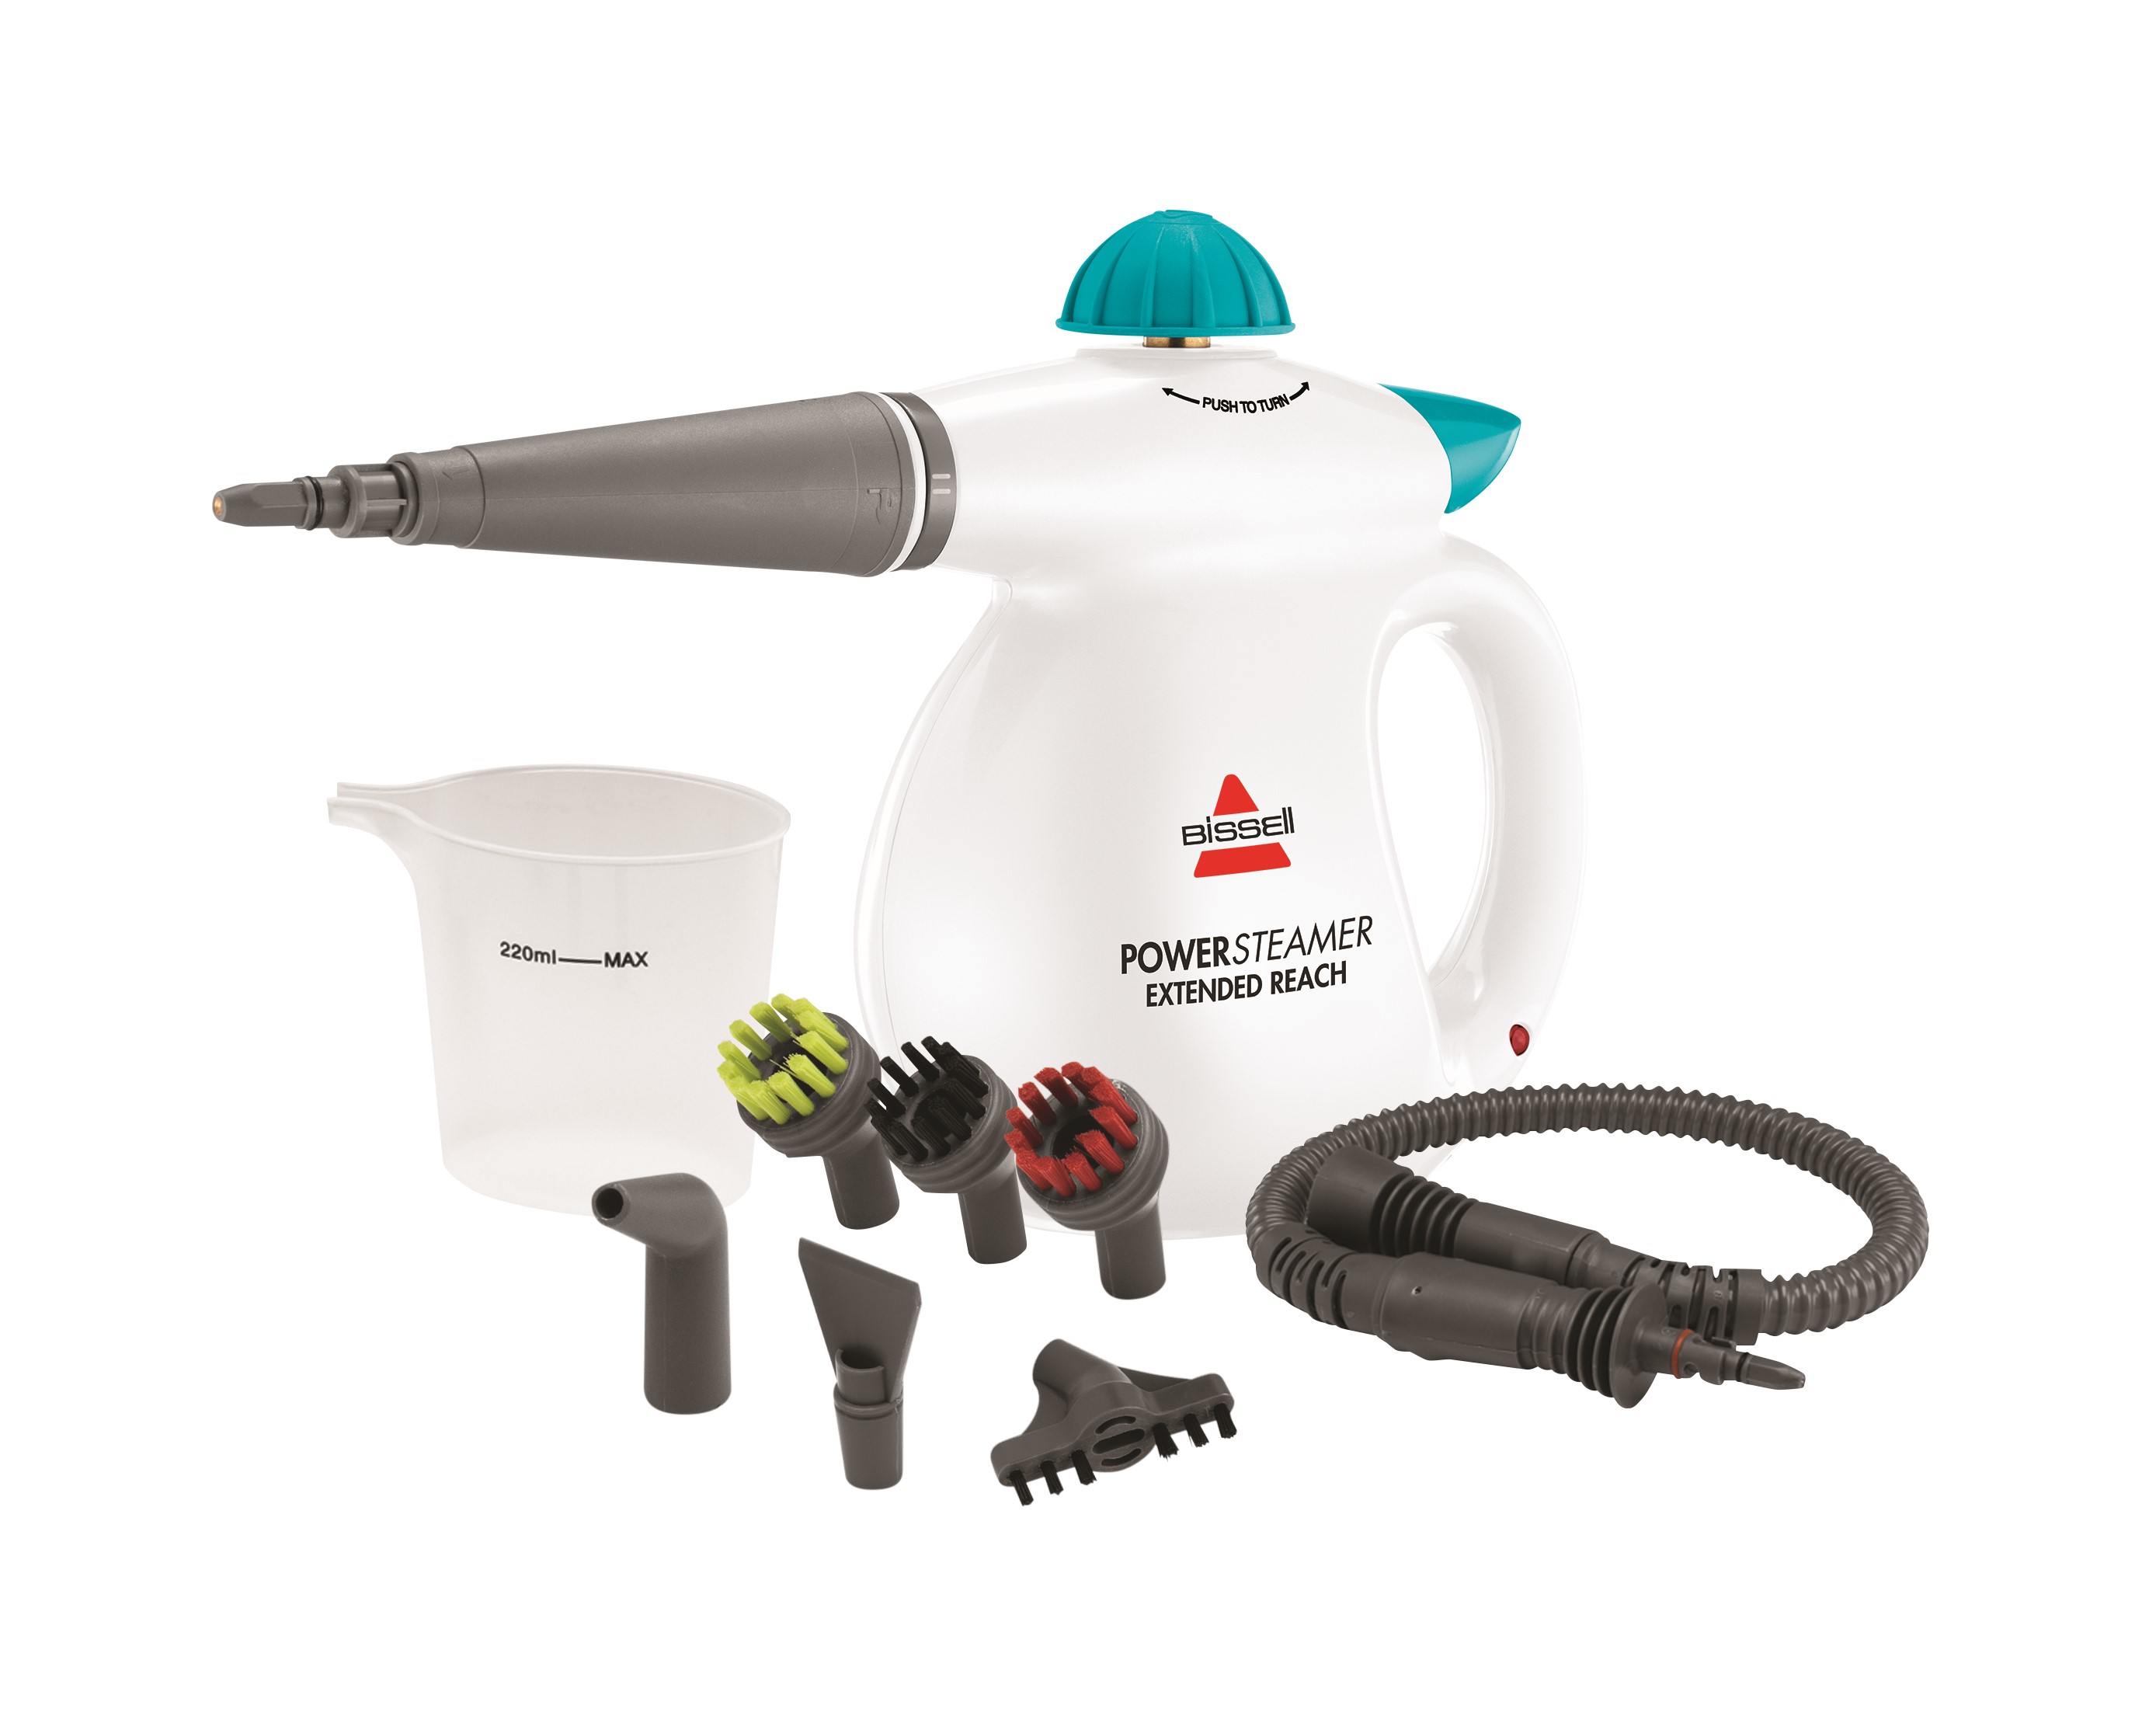 BISSELL Powersteamer Extended Reach Hand Held Steamer - 2994W - image 1 of 9